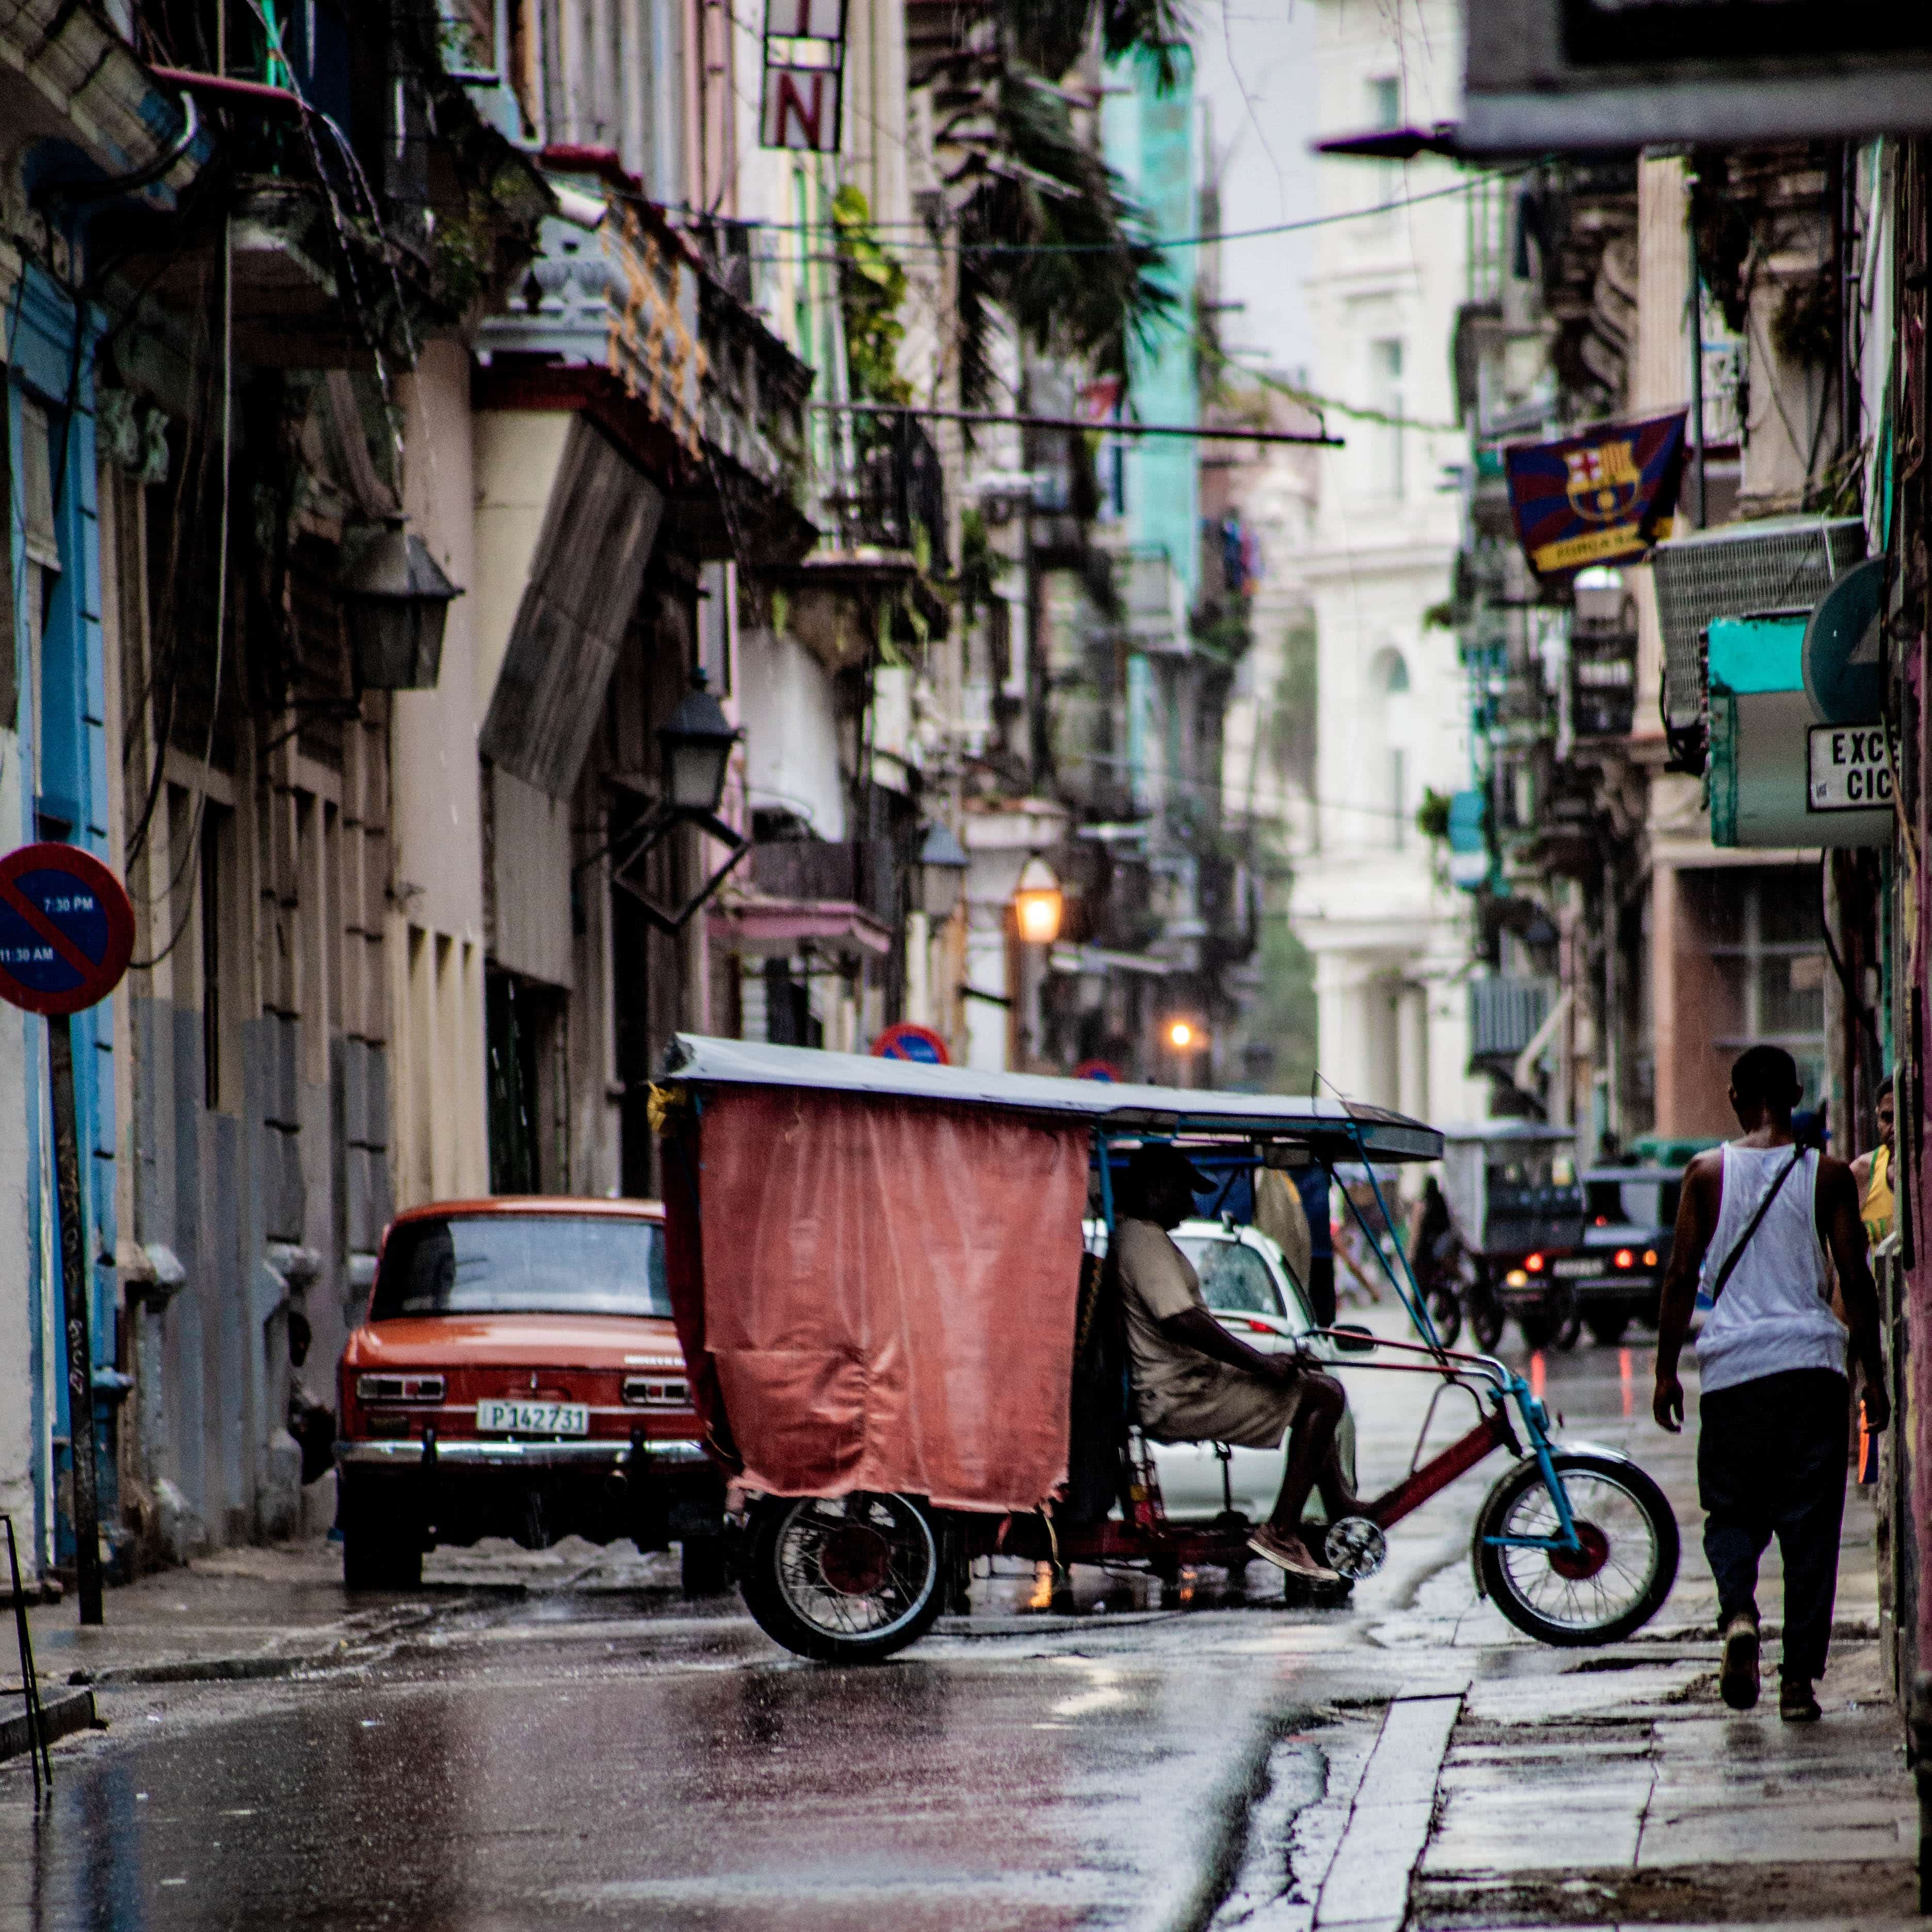 Bici-taxi en La Habana Vieja. Photo by Nate Cohen from Pexels